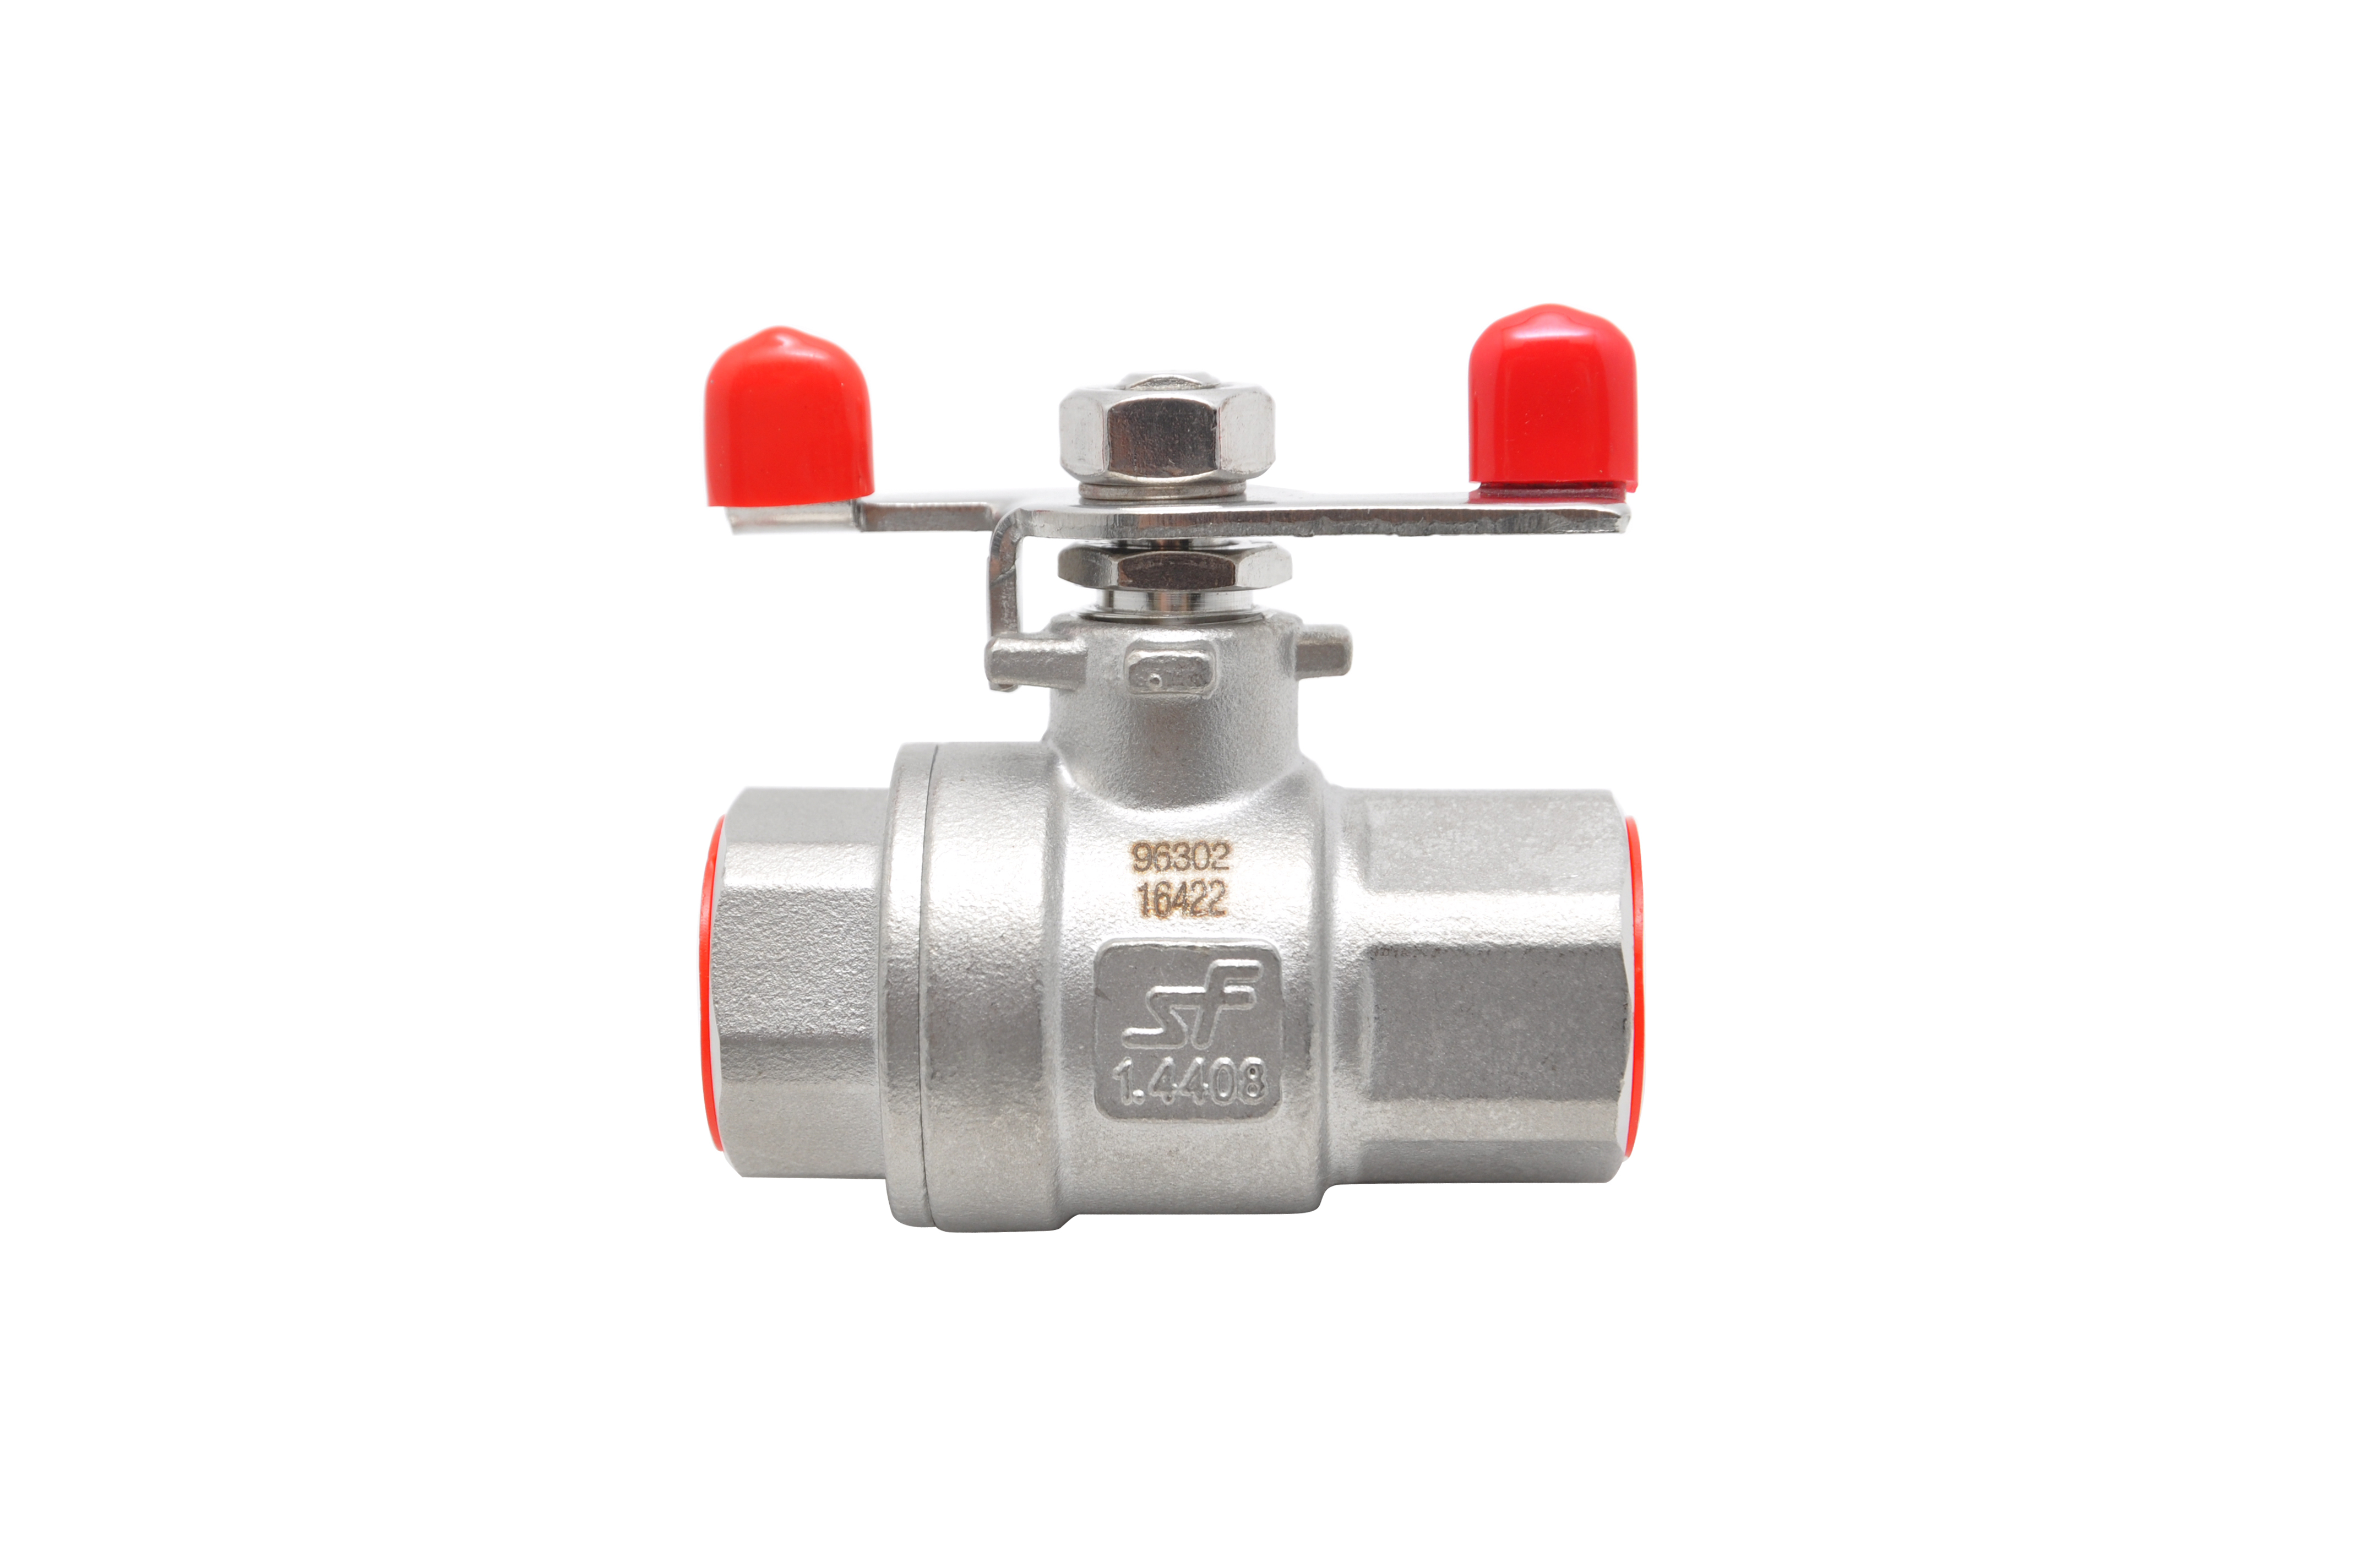 Ball valve with wing handle type 360 1/2"